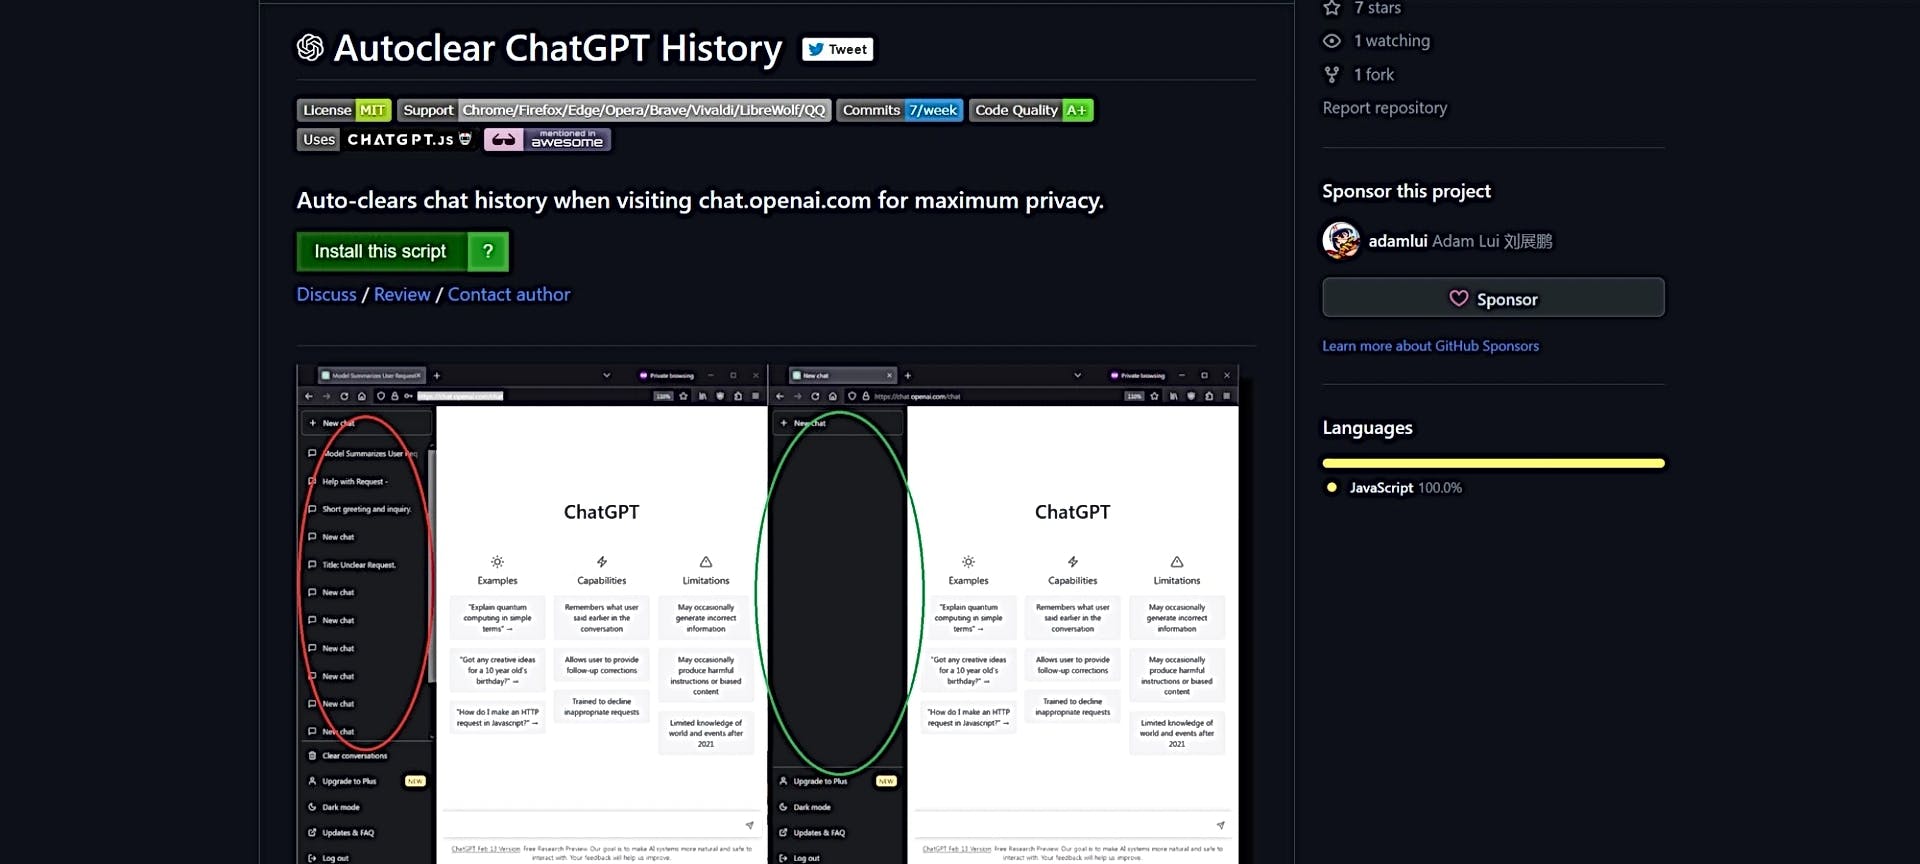 Autoclear ChatGPT History featured